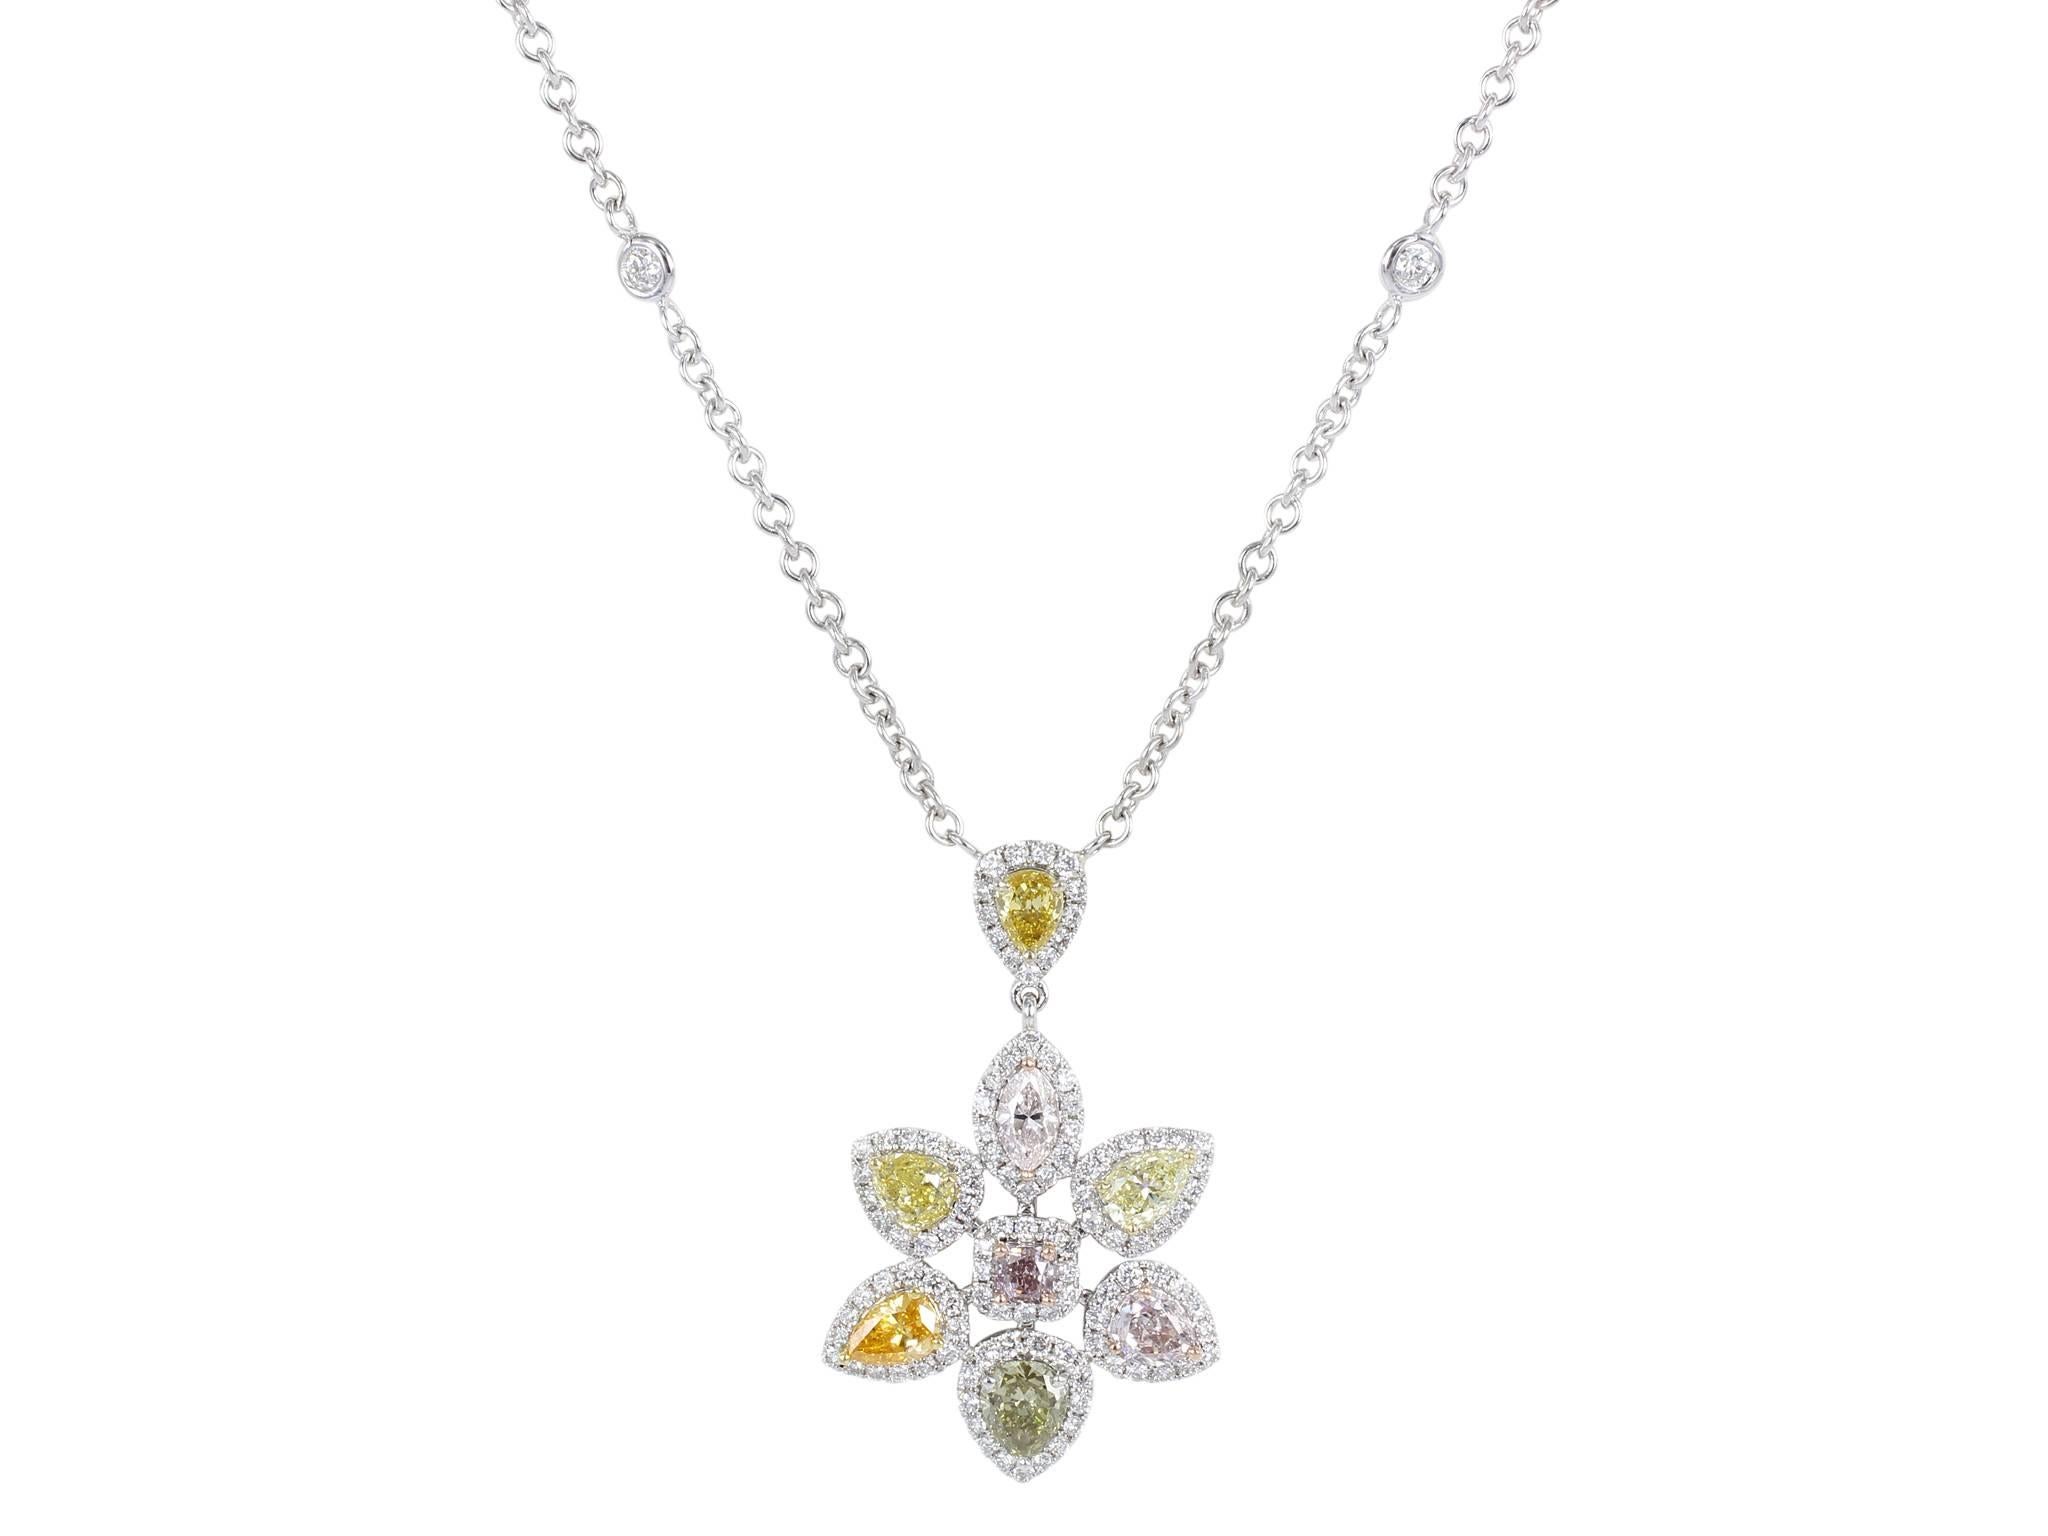 18 karat white gold floral style pendant consisting of 8 pear shape and radiant cut natural fancy color diamonds having a total weight of 2.63 carats set with 1.21 carats total weight of round brilliant cut diamonds.